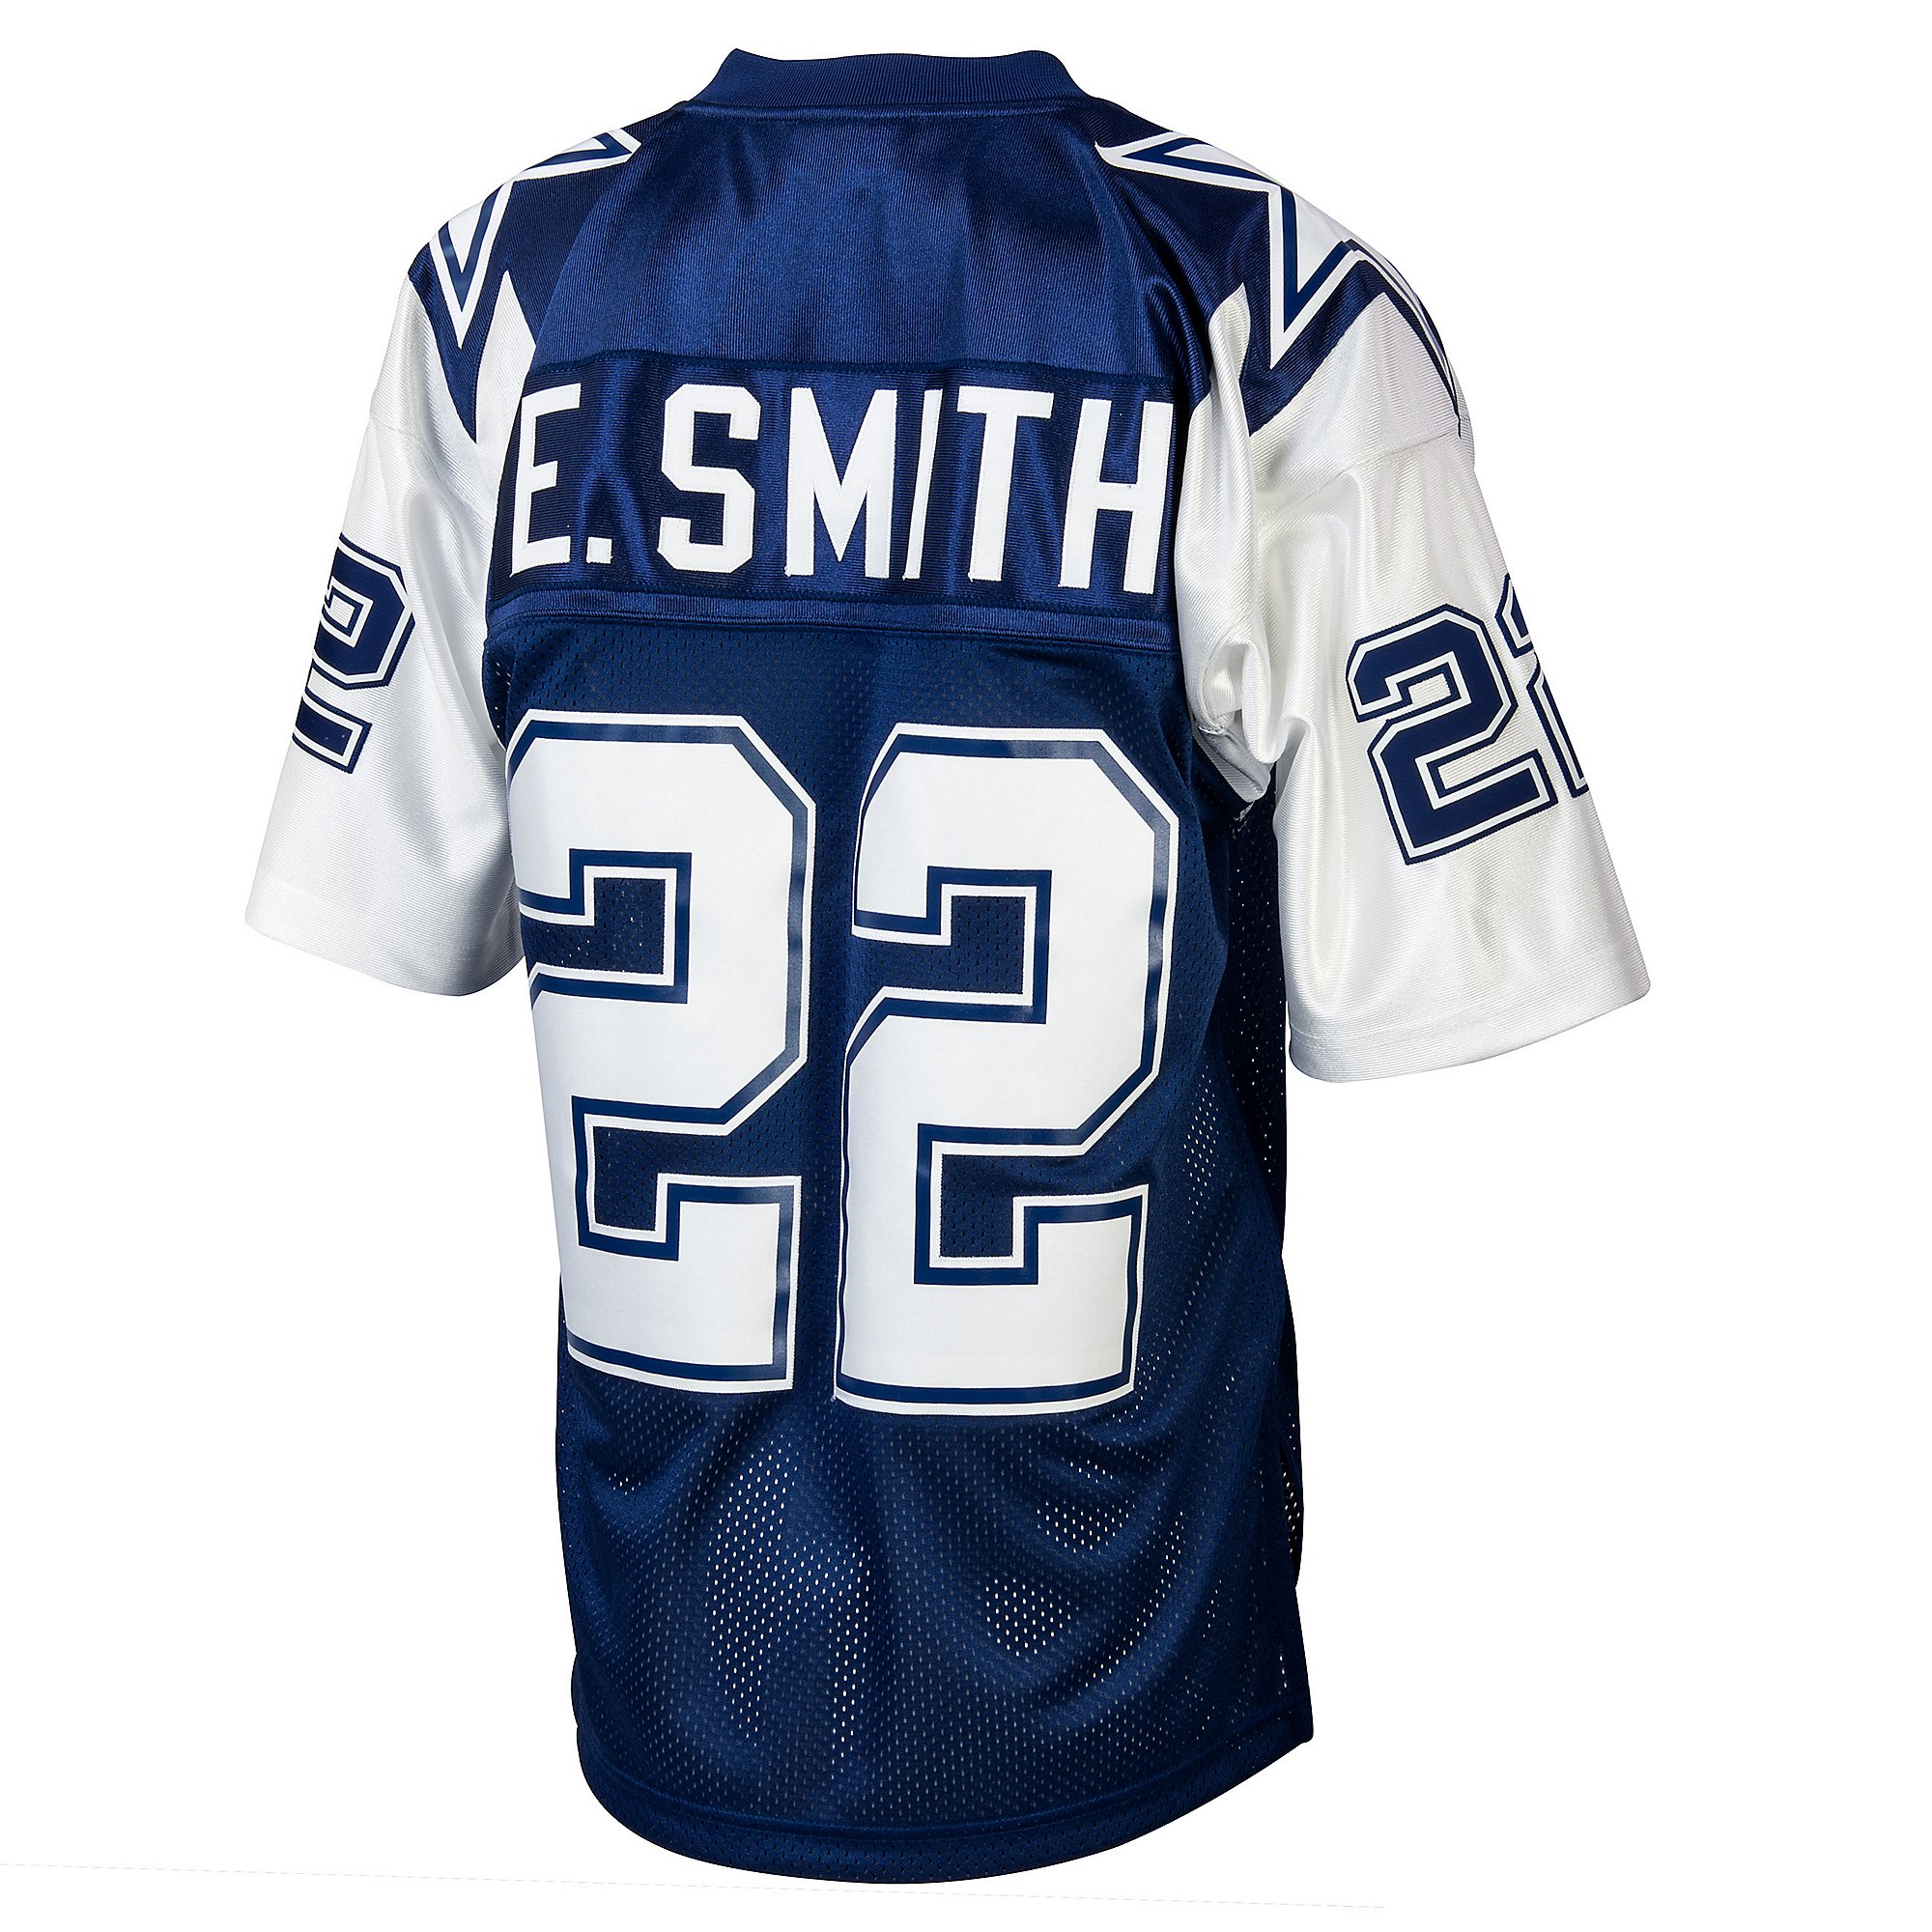 mitchell and ness dallas cowboys jersey